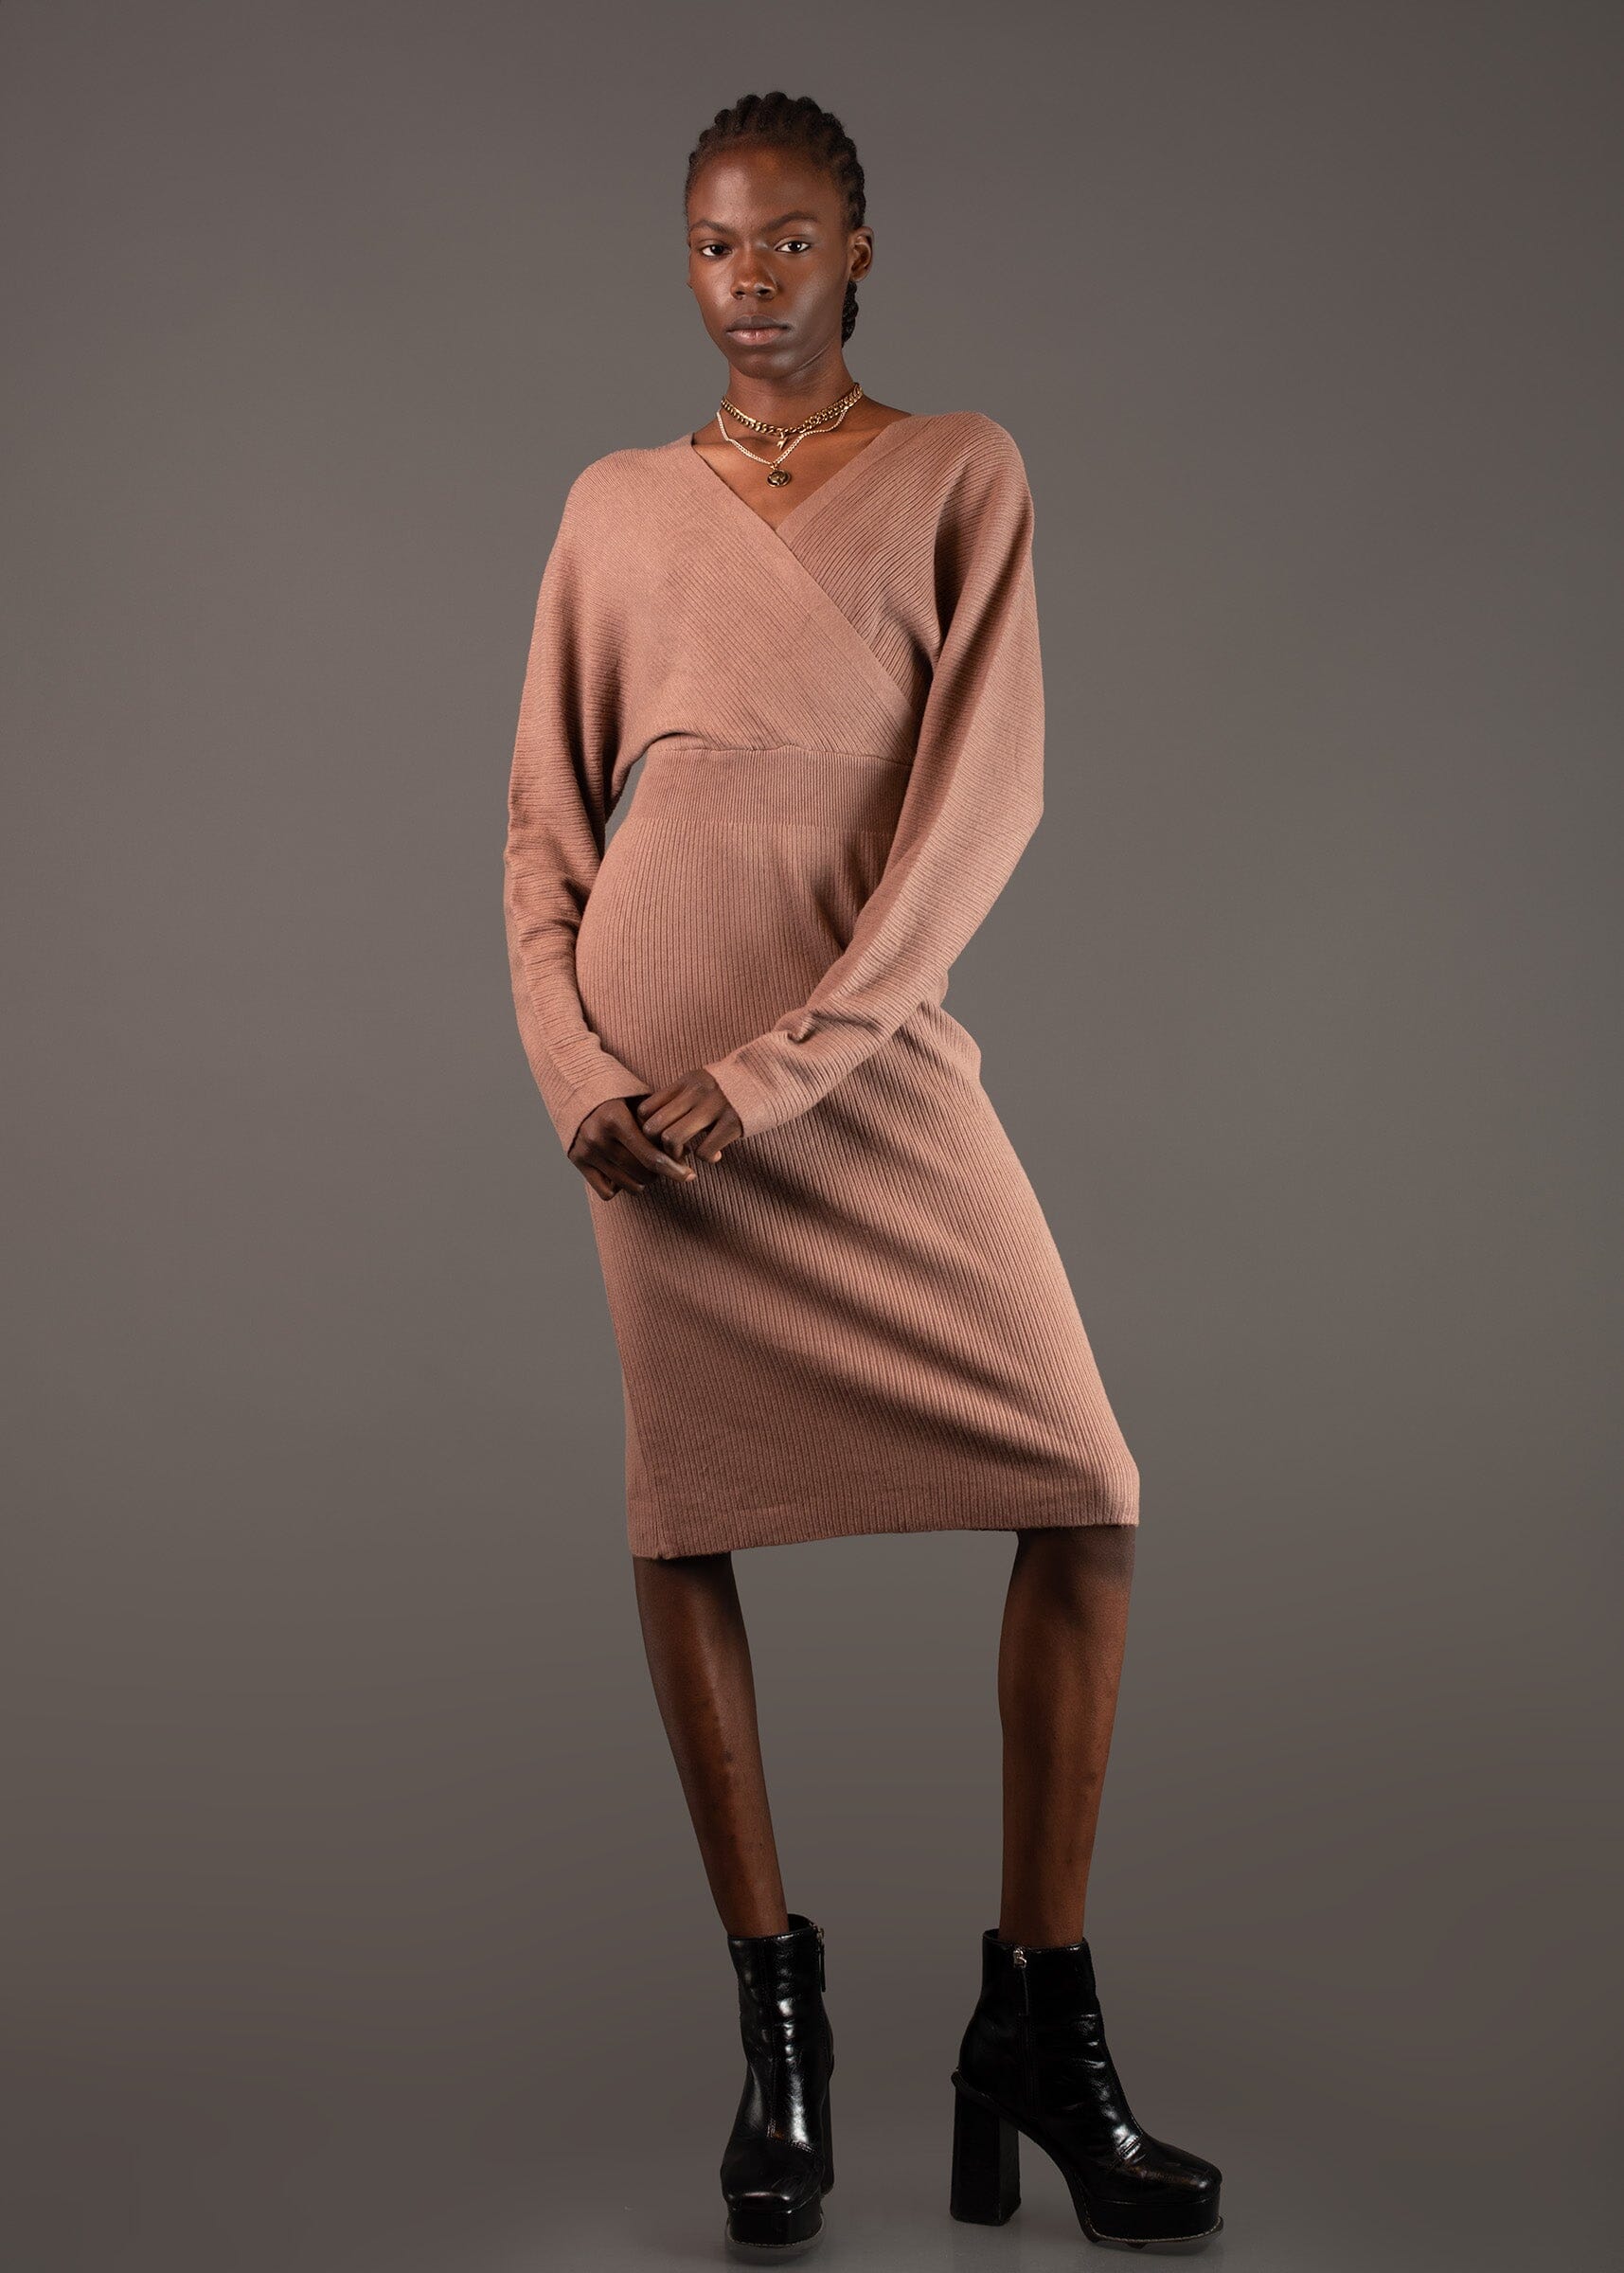 Fitted V Neck Sweater Dress Dresses Kate Hewko 